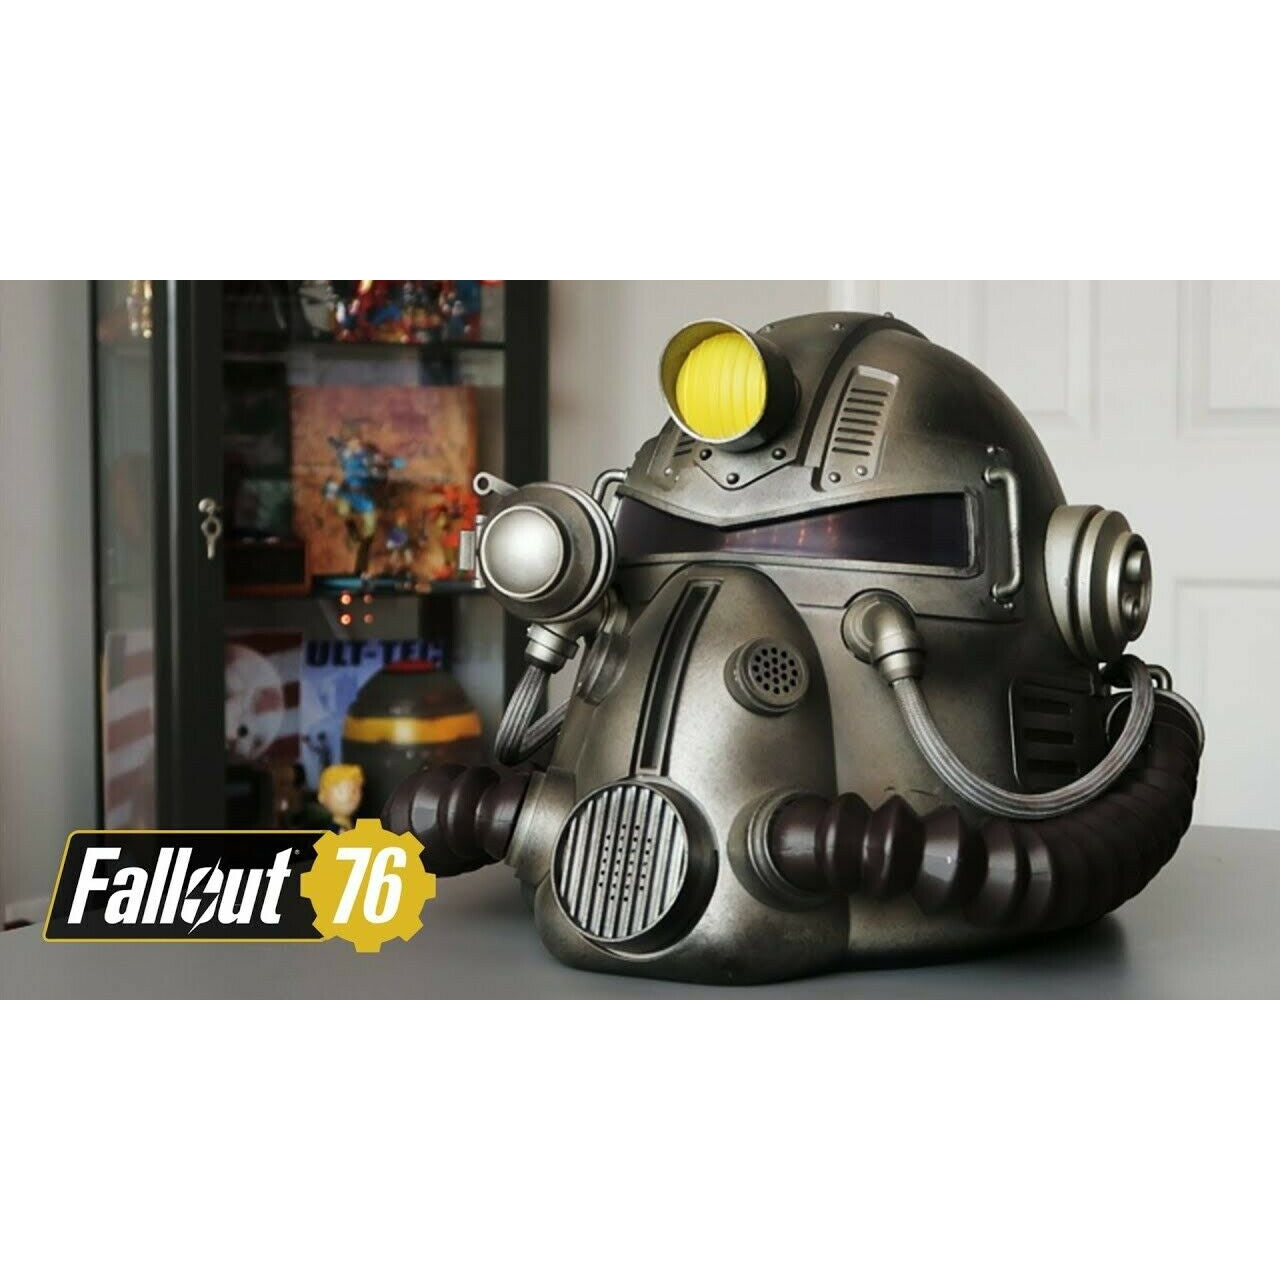 Fallout 76 Power Armour Edition Collector's Edition Xbox One